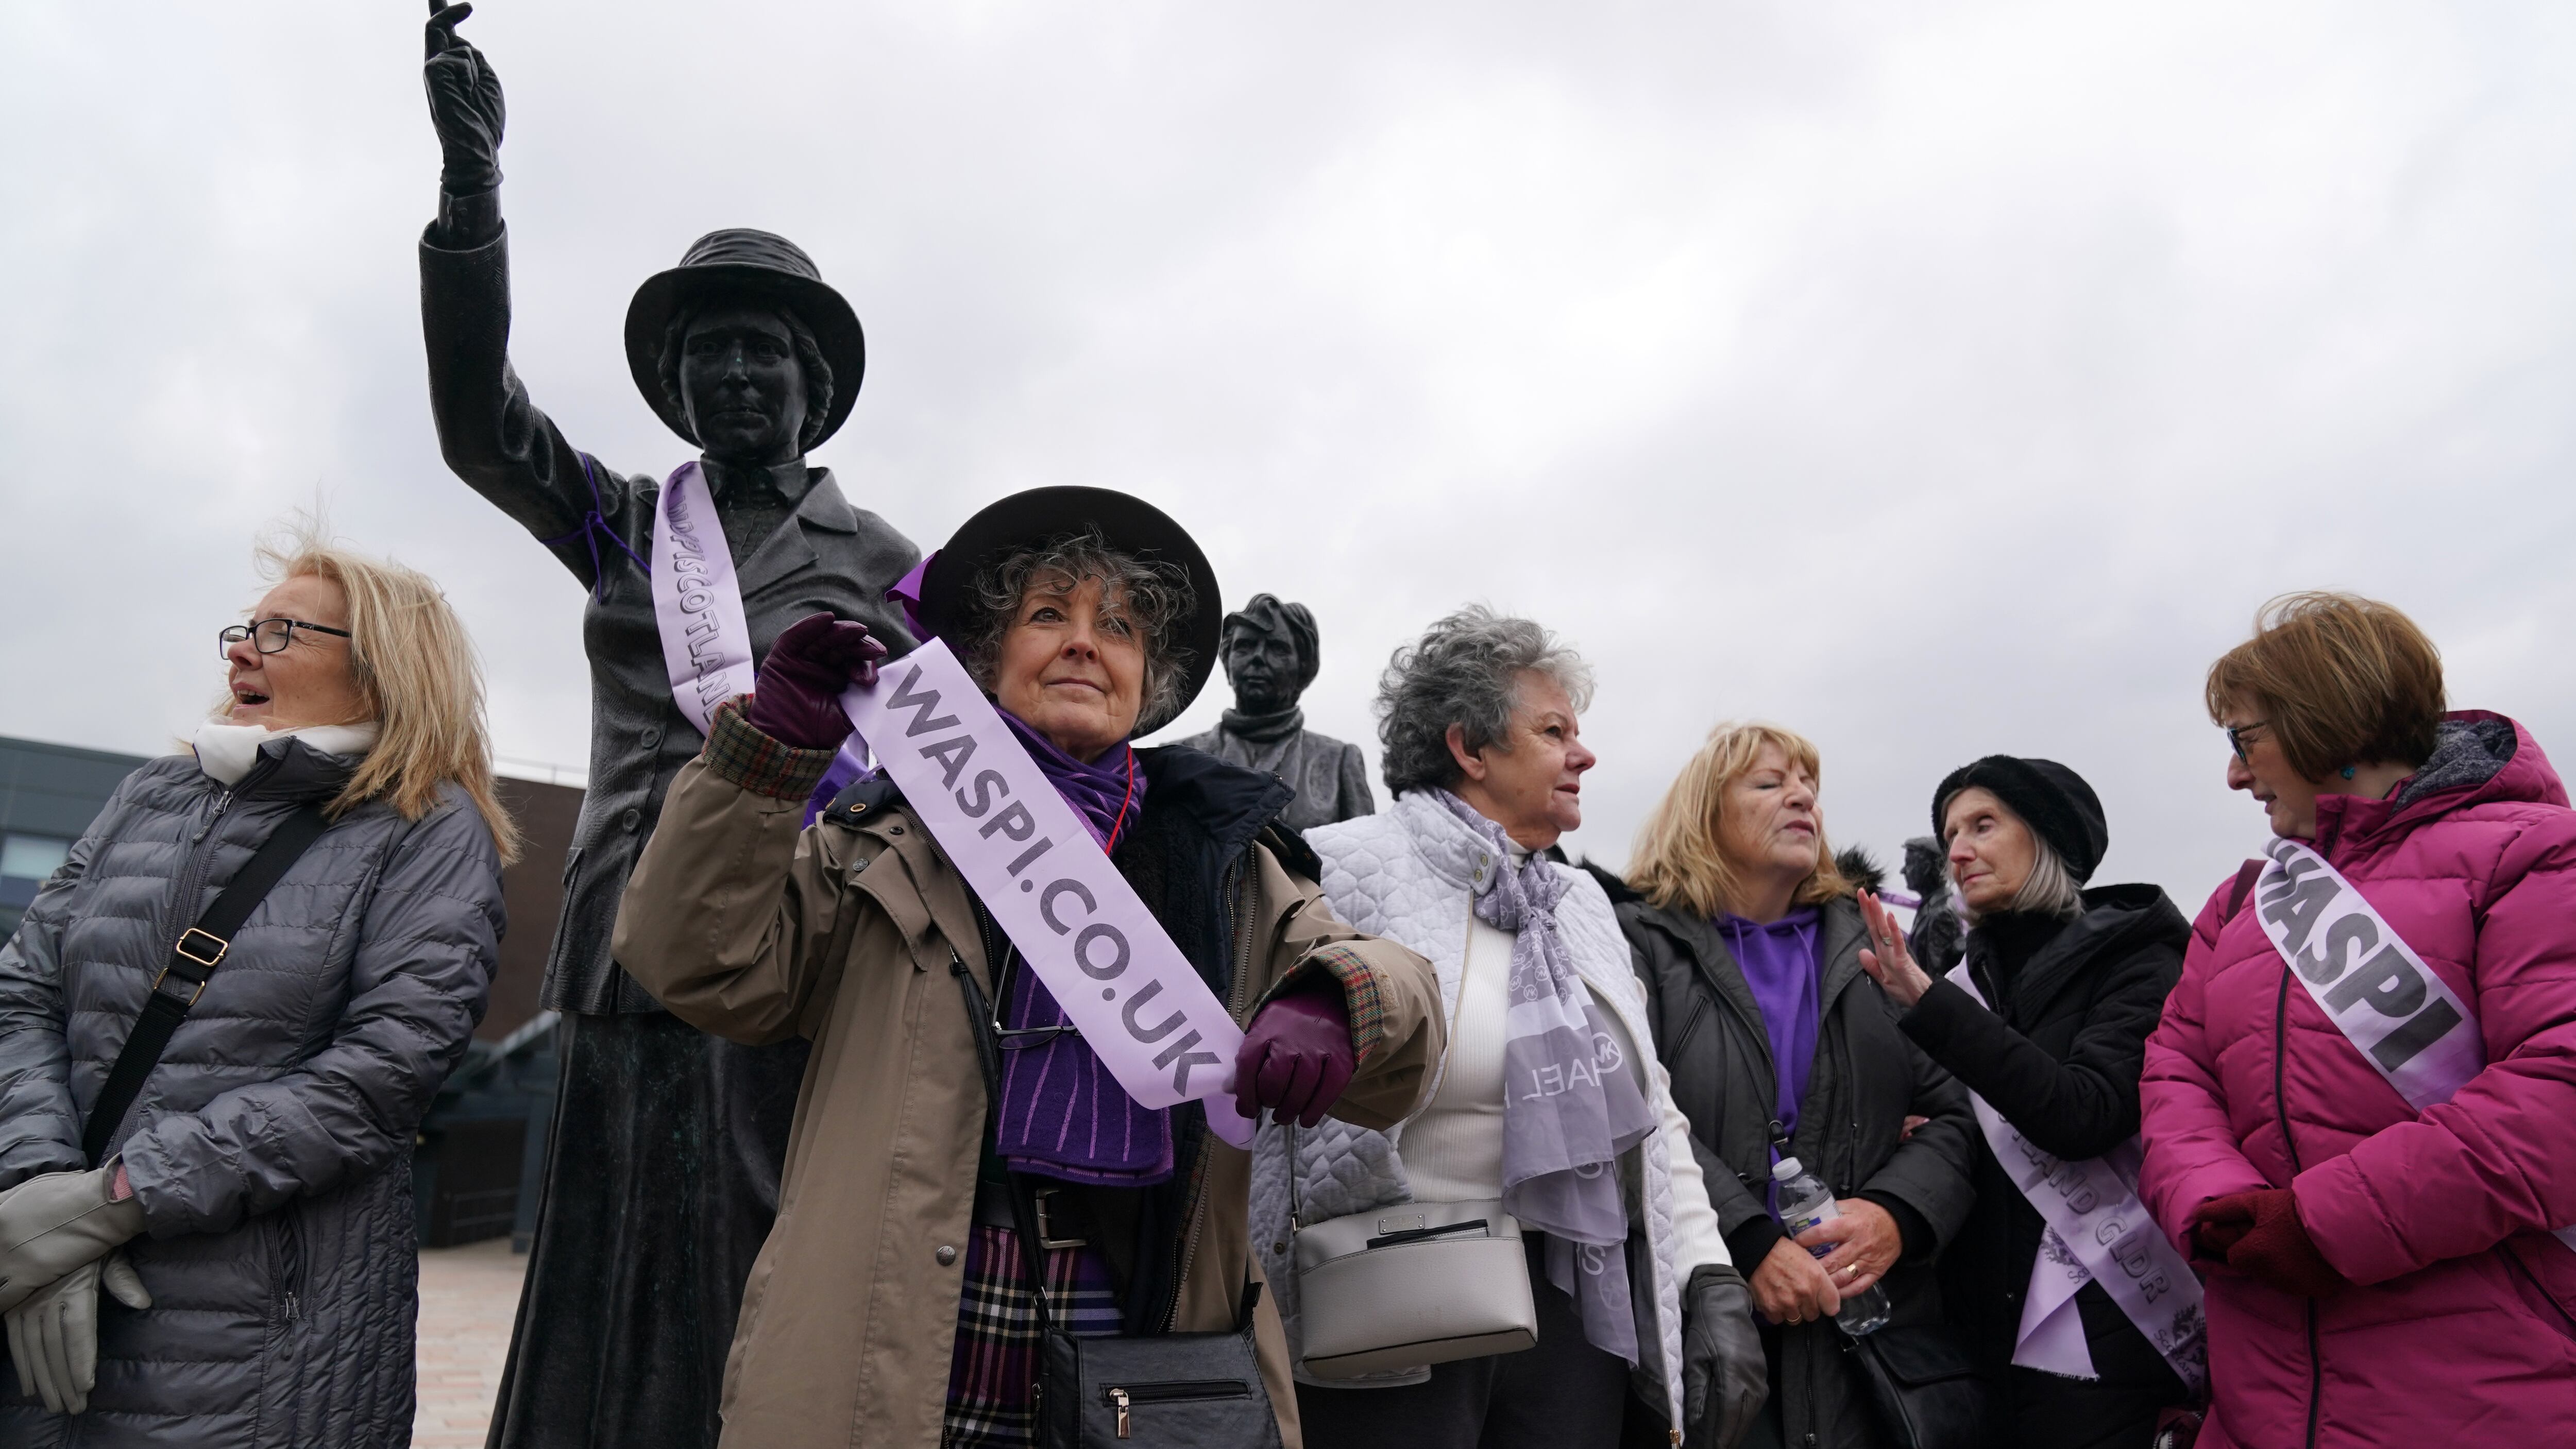 Campaigners for Women Against State Pension Inequality (Waspi) have called for politicians to commit to compensating them in line with recommendations from the Ombudsman.